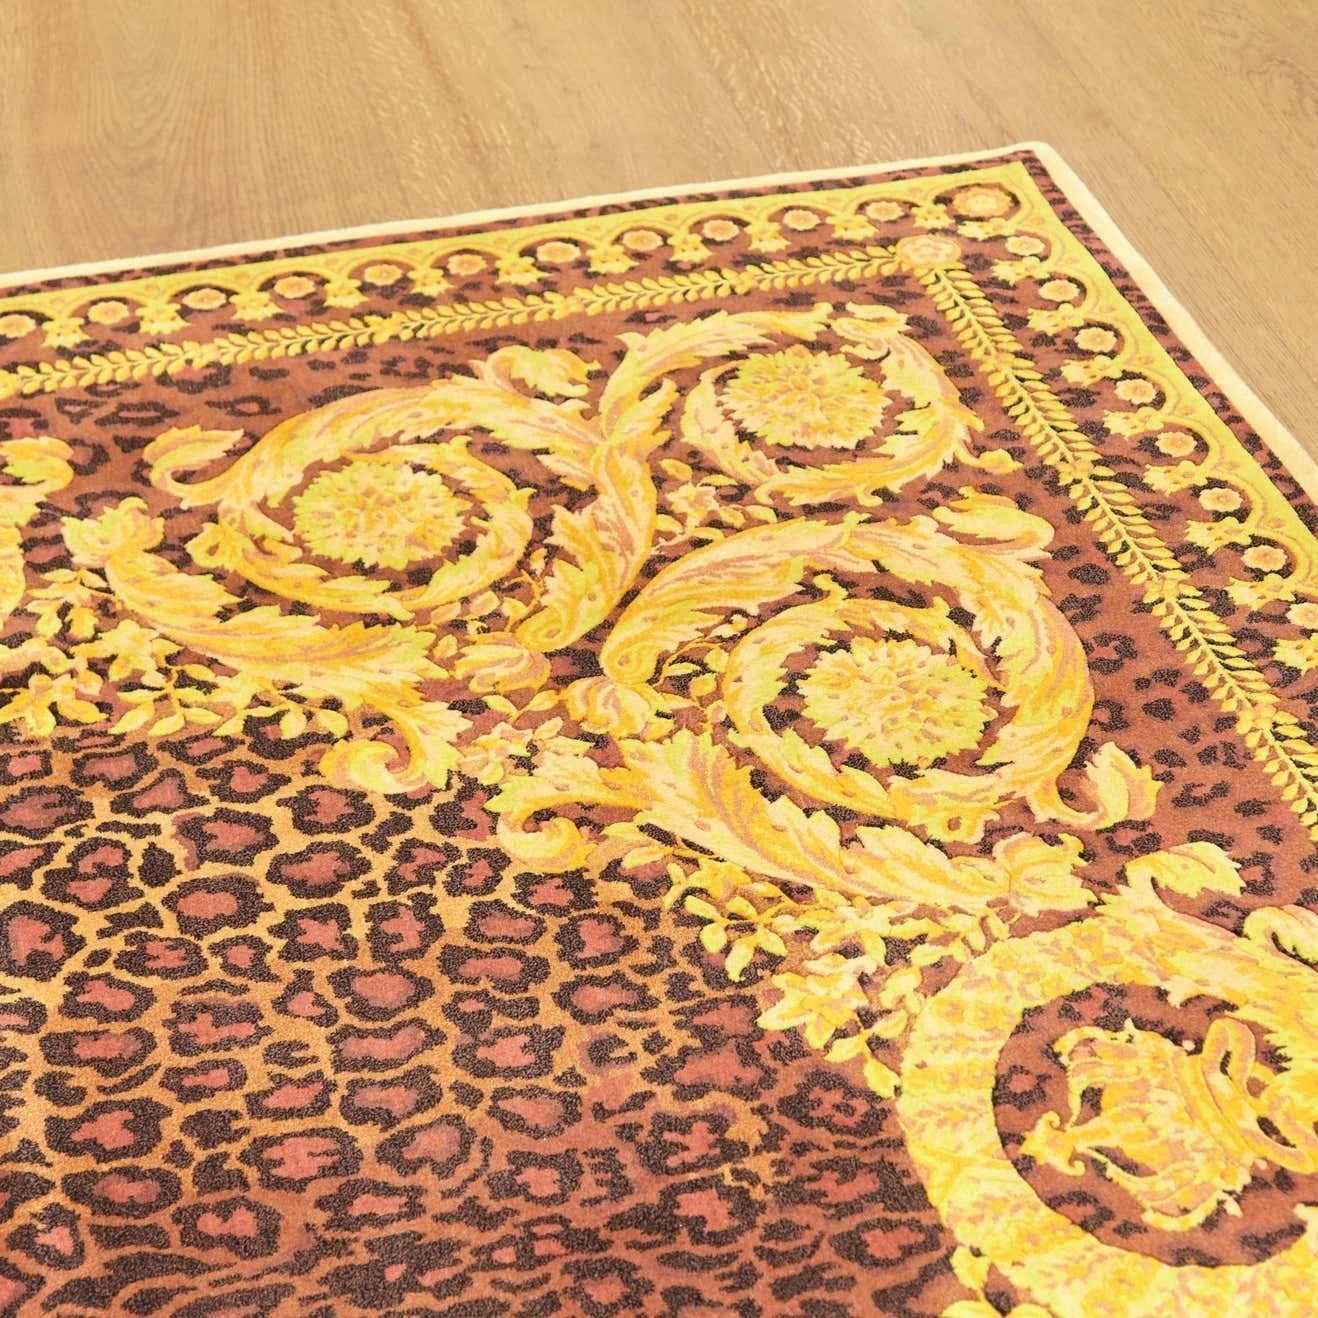 Gianni Versace Collection Rug Wild Barocco, Gold Leopard Animal Print, 1980 For Sale 1